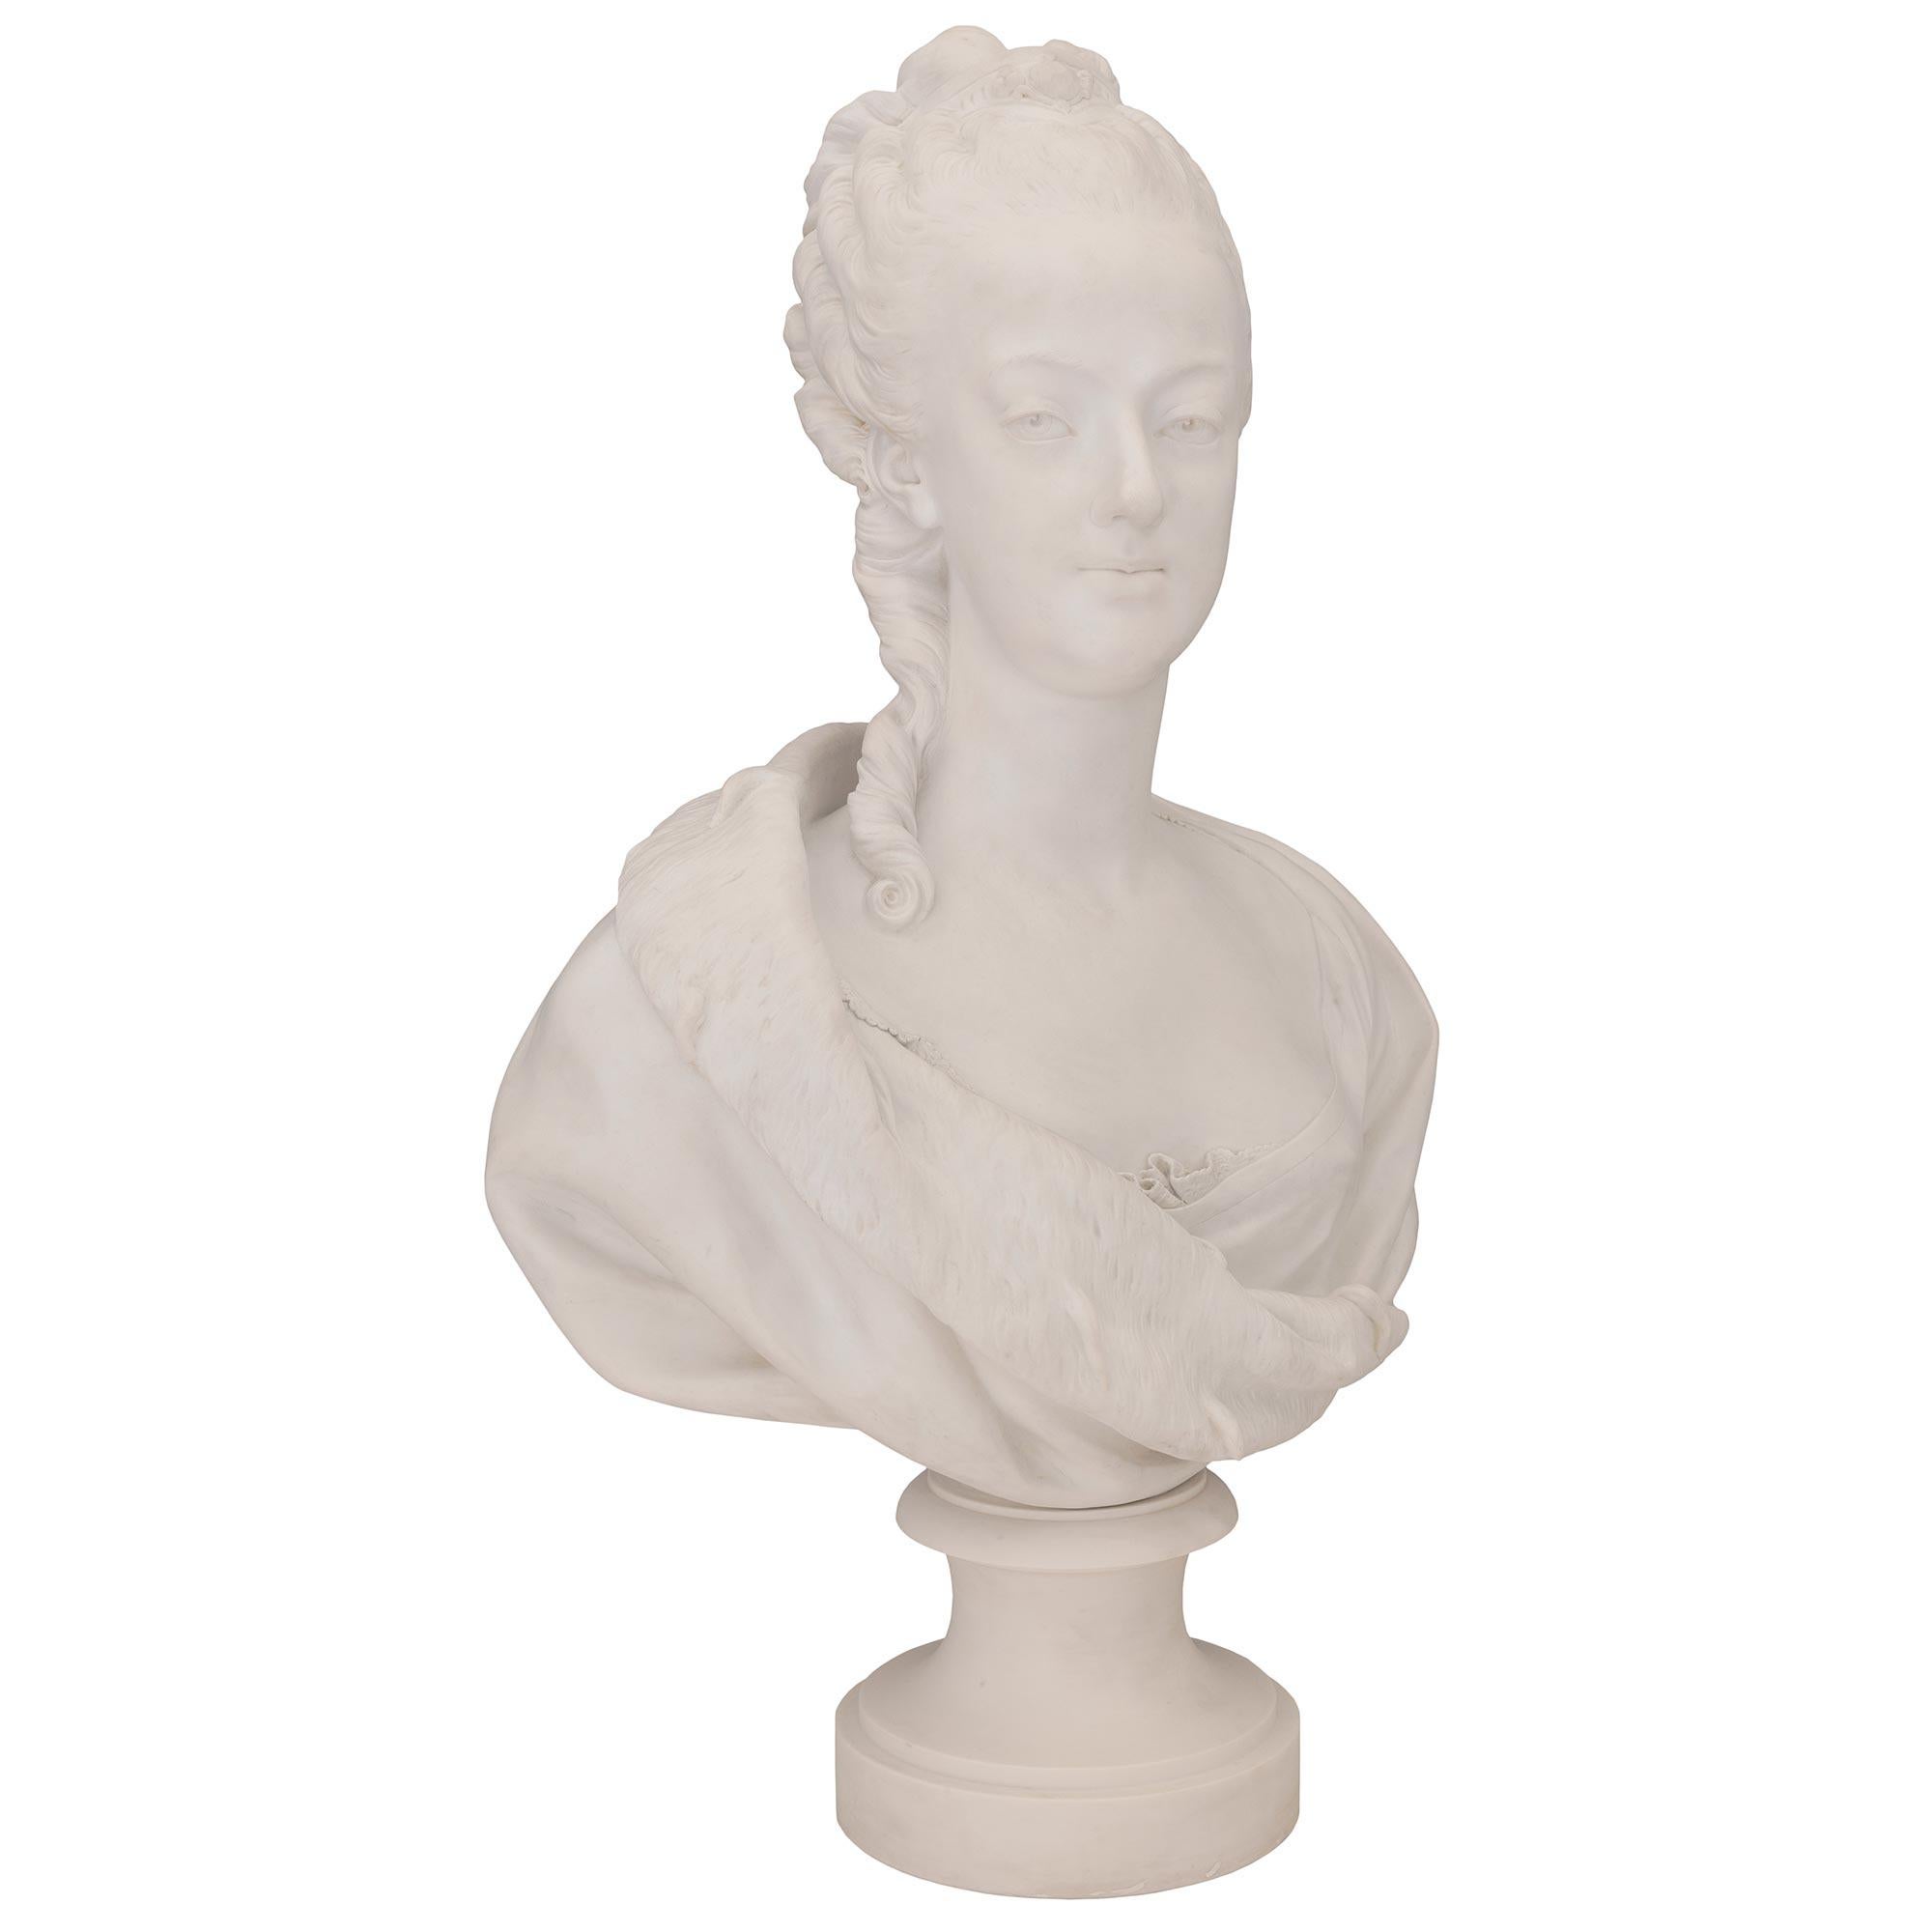 An elegant and high quality French 19th century Louis XVI st. Biscuit de Sèvres porcelain bust of Marie Antoinette. The bust is raised by a circular socle shaped pedestal base with a finely mottled wrap around border. Above is the richly detailed